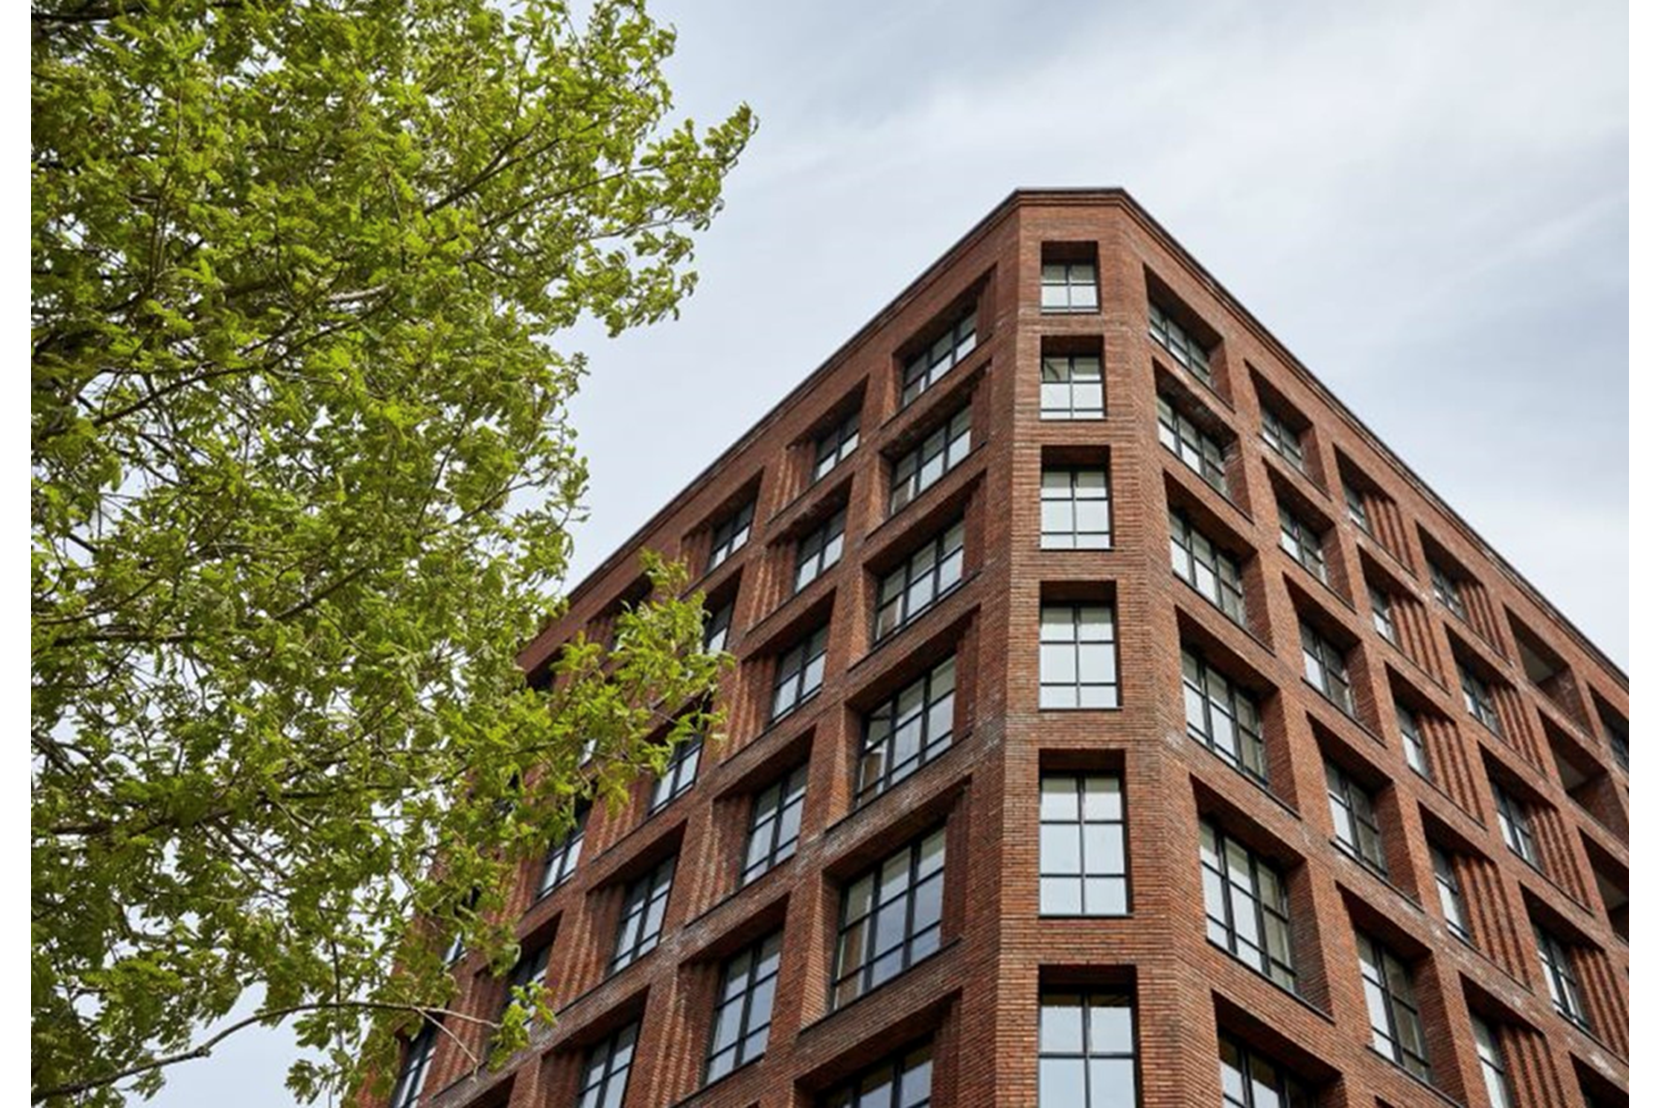 Apartments to Rent by Northern Group at One Silk Street, Manchester, M4, building panoramic